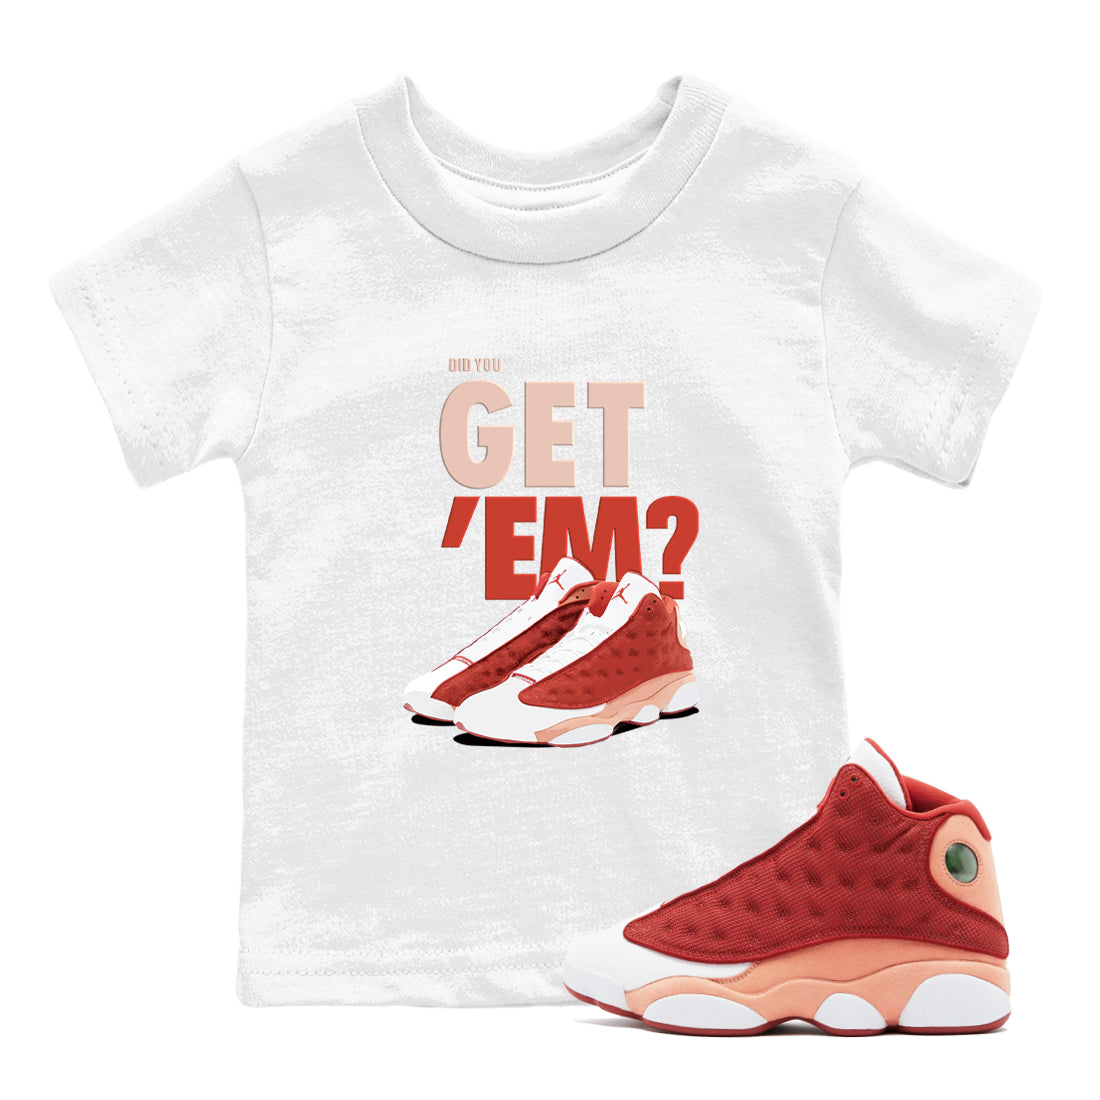 13s Dune Red shirts to match jordans Did You Get 'Em sneaker match tees Air Jordan 13 Dune Red SNRT Sneaker Tees streetwear brand Baby and Youth White 1 cotton tee